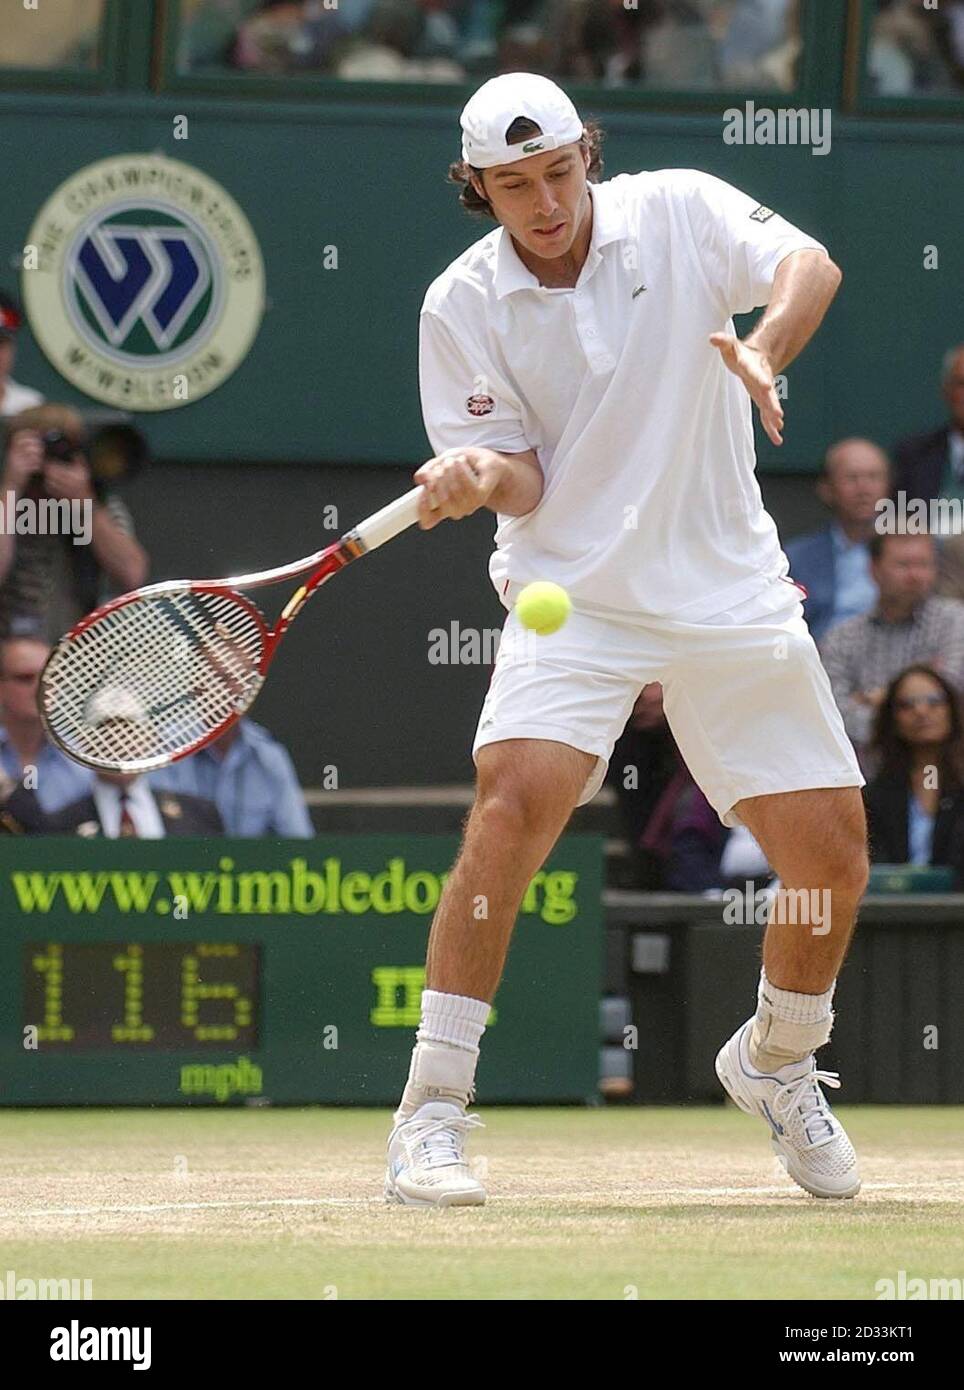 Sebastien Grosjean from France in action against the defending champion  Roger Federer from Switzerland in the semi-final of the Men's Singles  tournament at The Lawn Tennis Championships at Wimbledon, London. EDITORIAL  USE